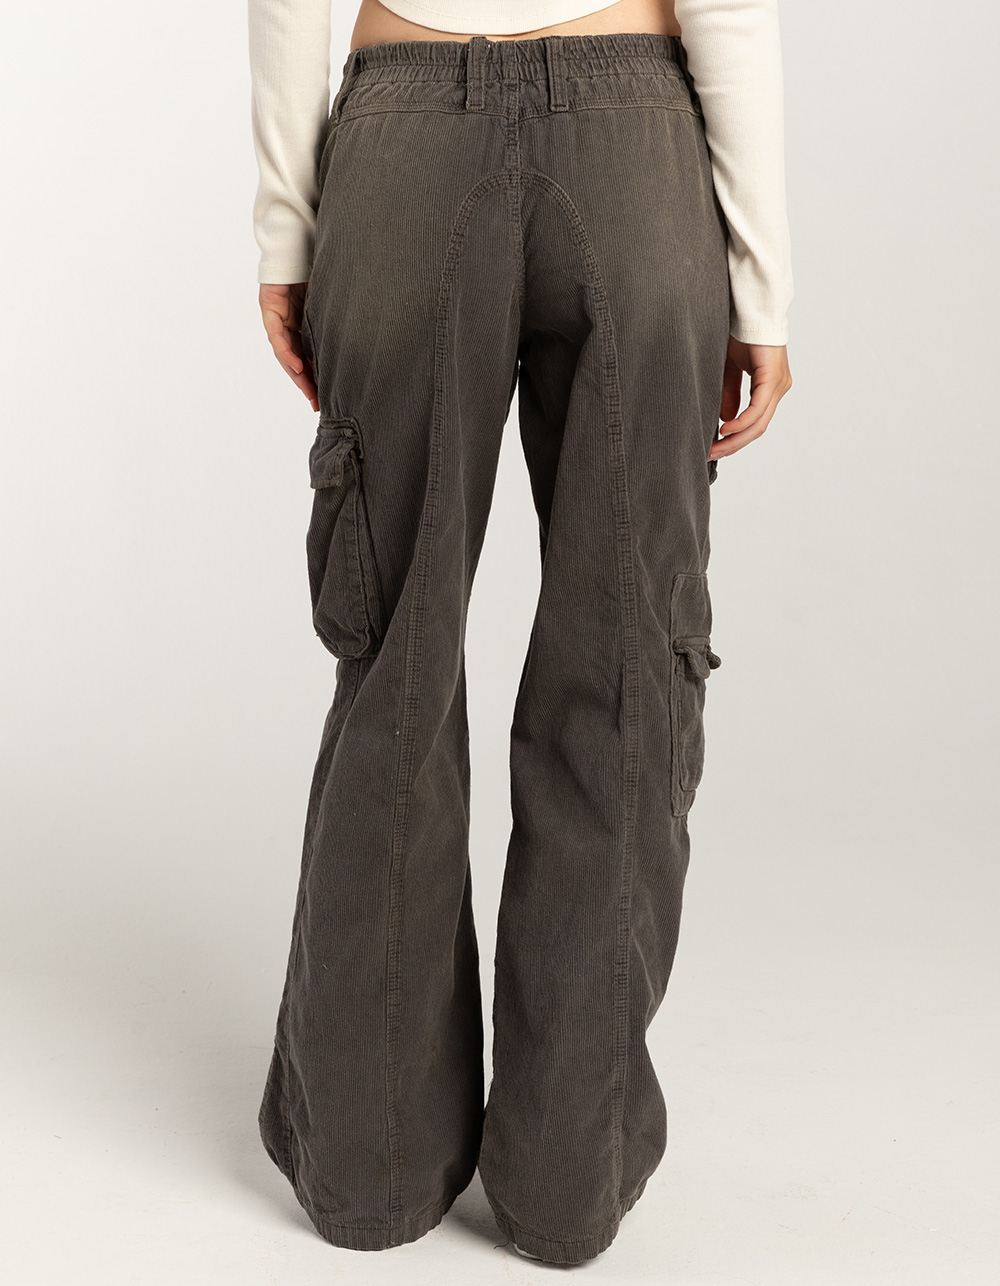 BDG Urban Outfitters Y2K Mid Rise Corduroy Womens Cargo Pants - CHARCOAL |  Tillys